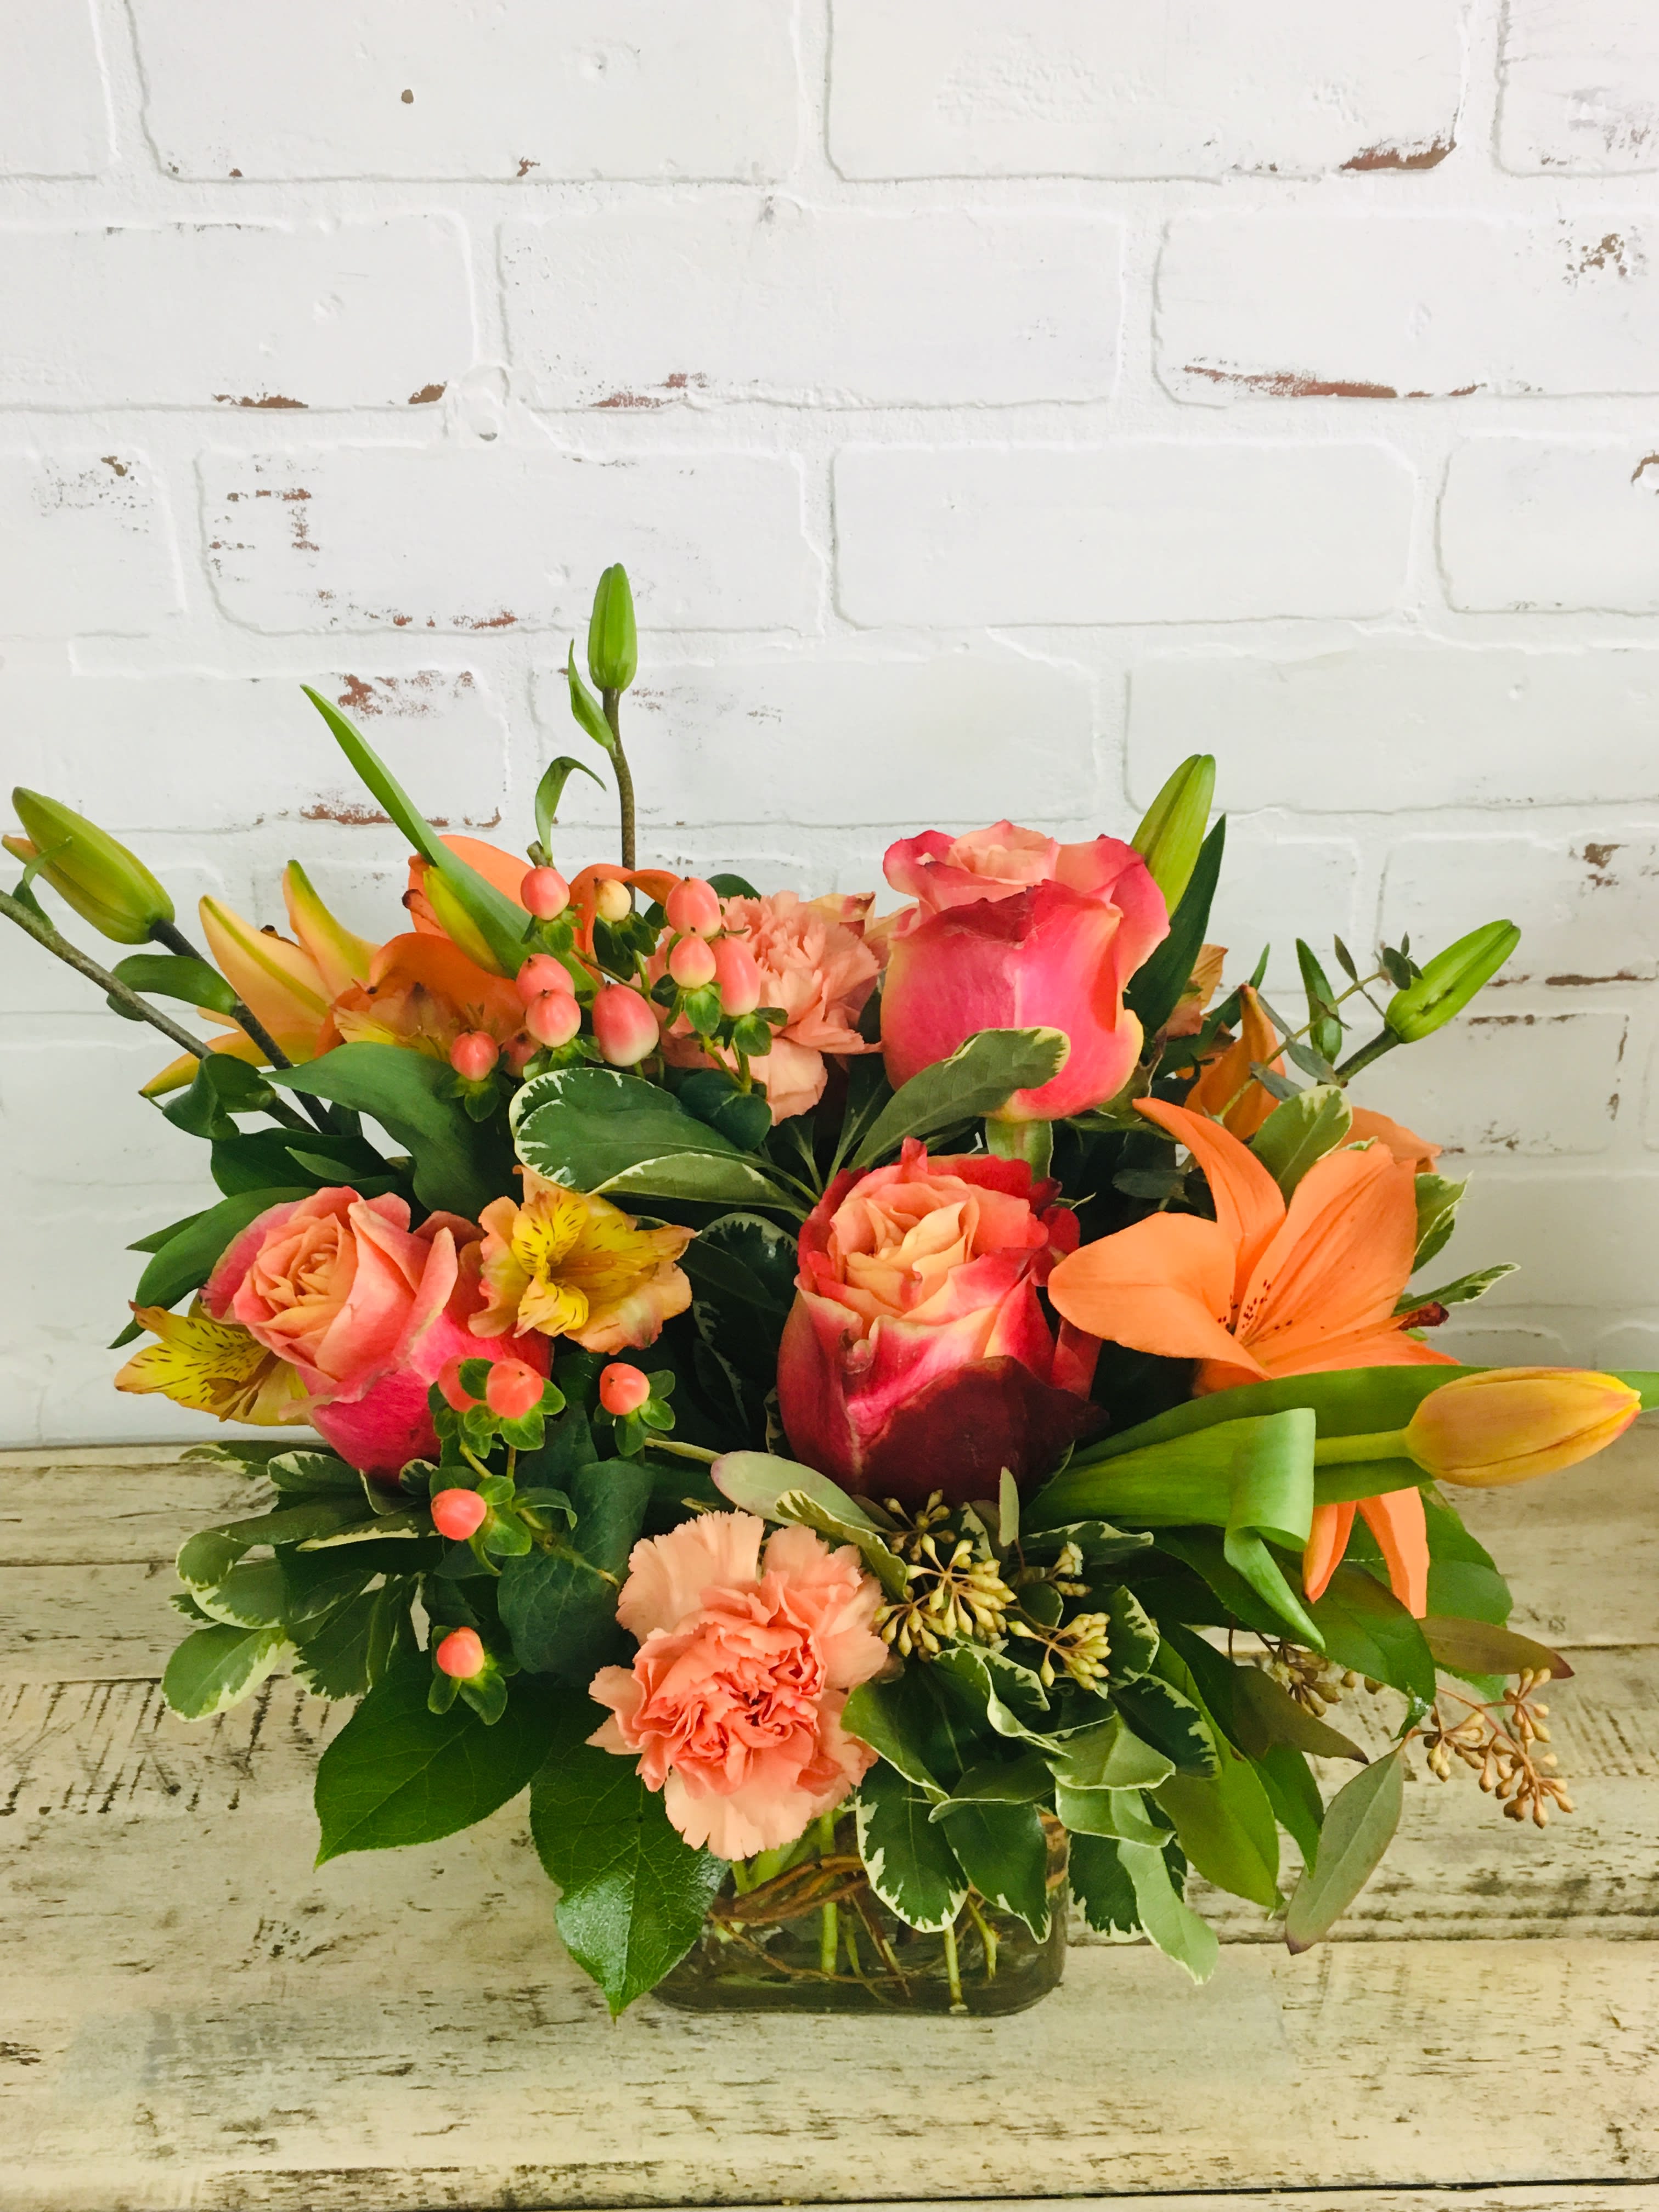 Tangerine Skies - Vibrant shades of orange flowers in a glass cube. A fun feel good arrangement for birthdays, get well, graduations, or anytime you want to brighten a cloudy day!